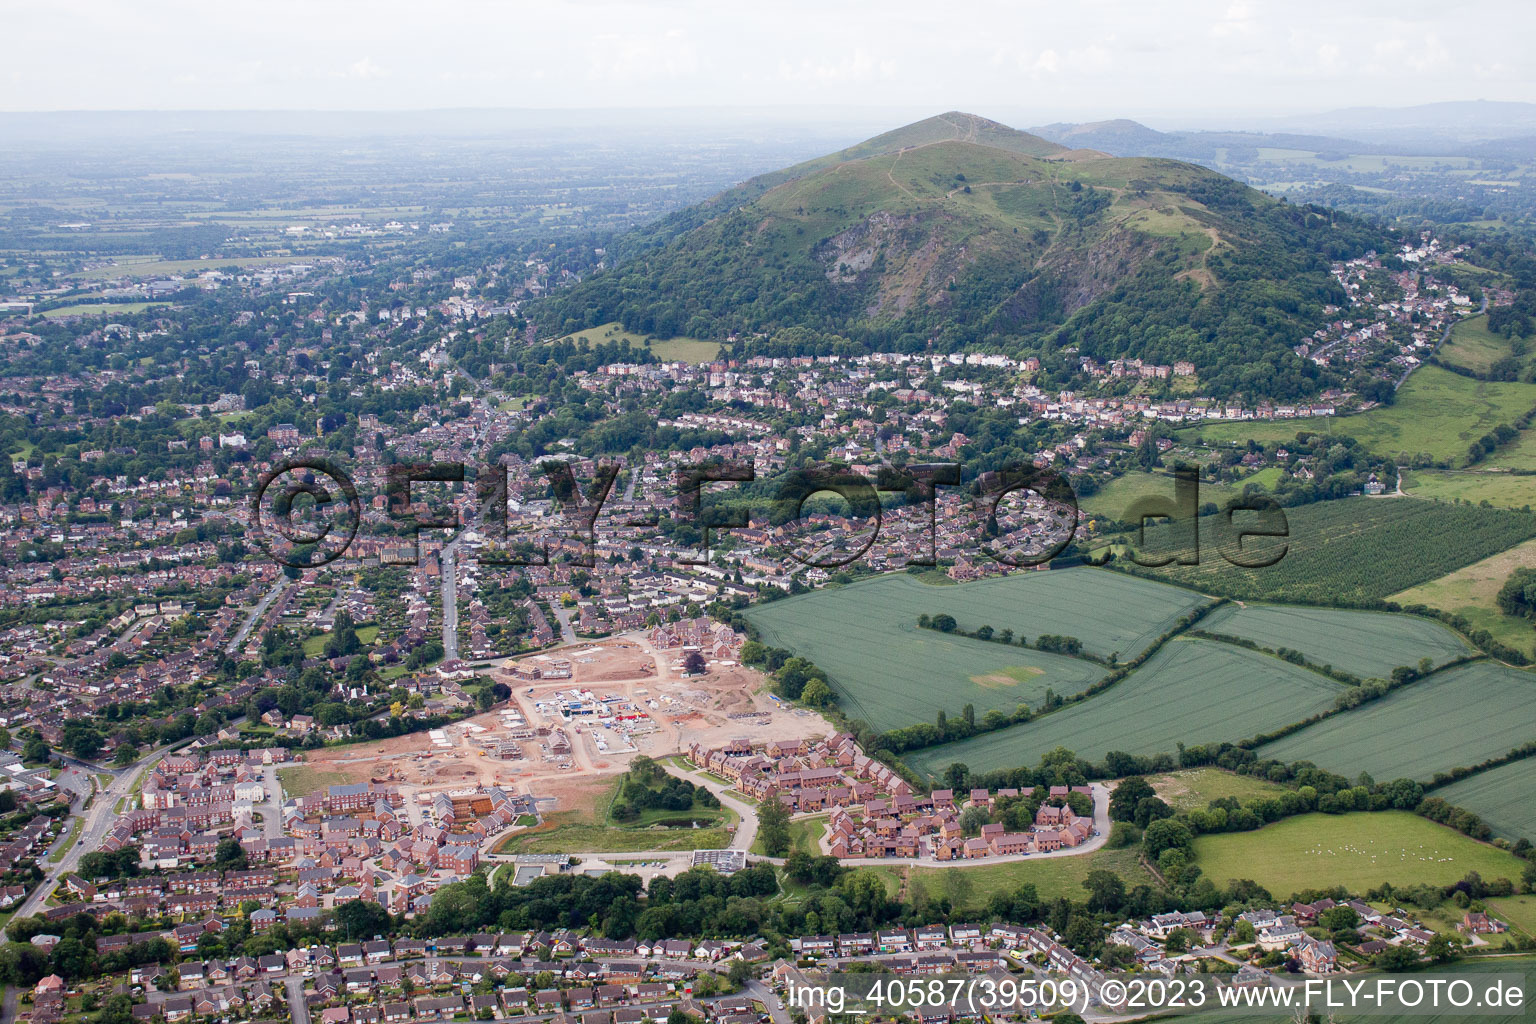 Malvern Link in the state England, Great Britain